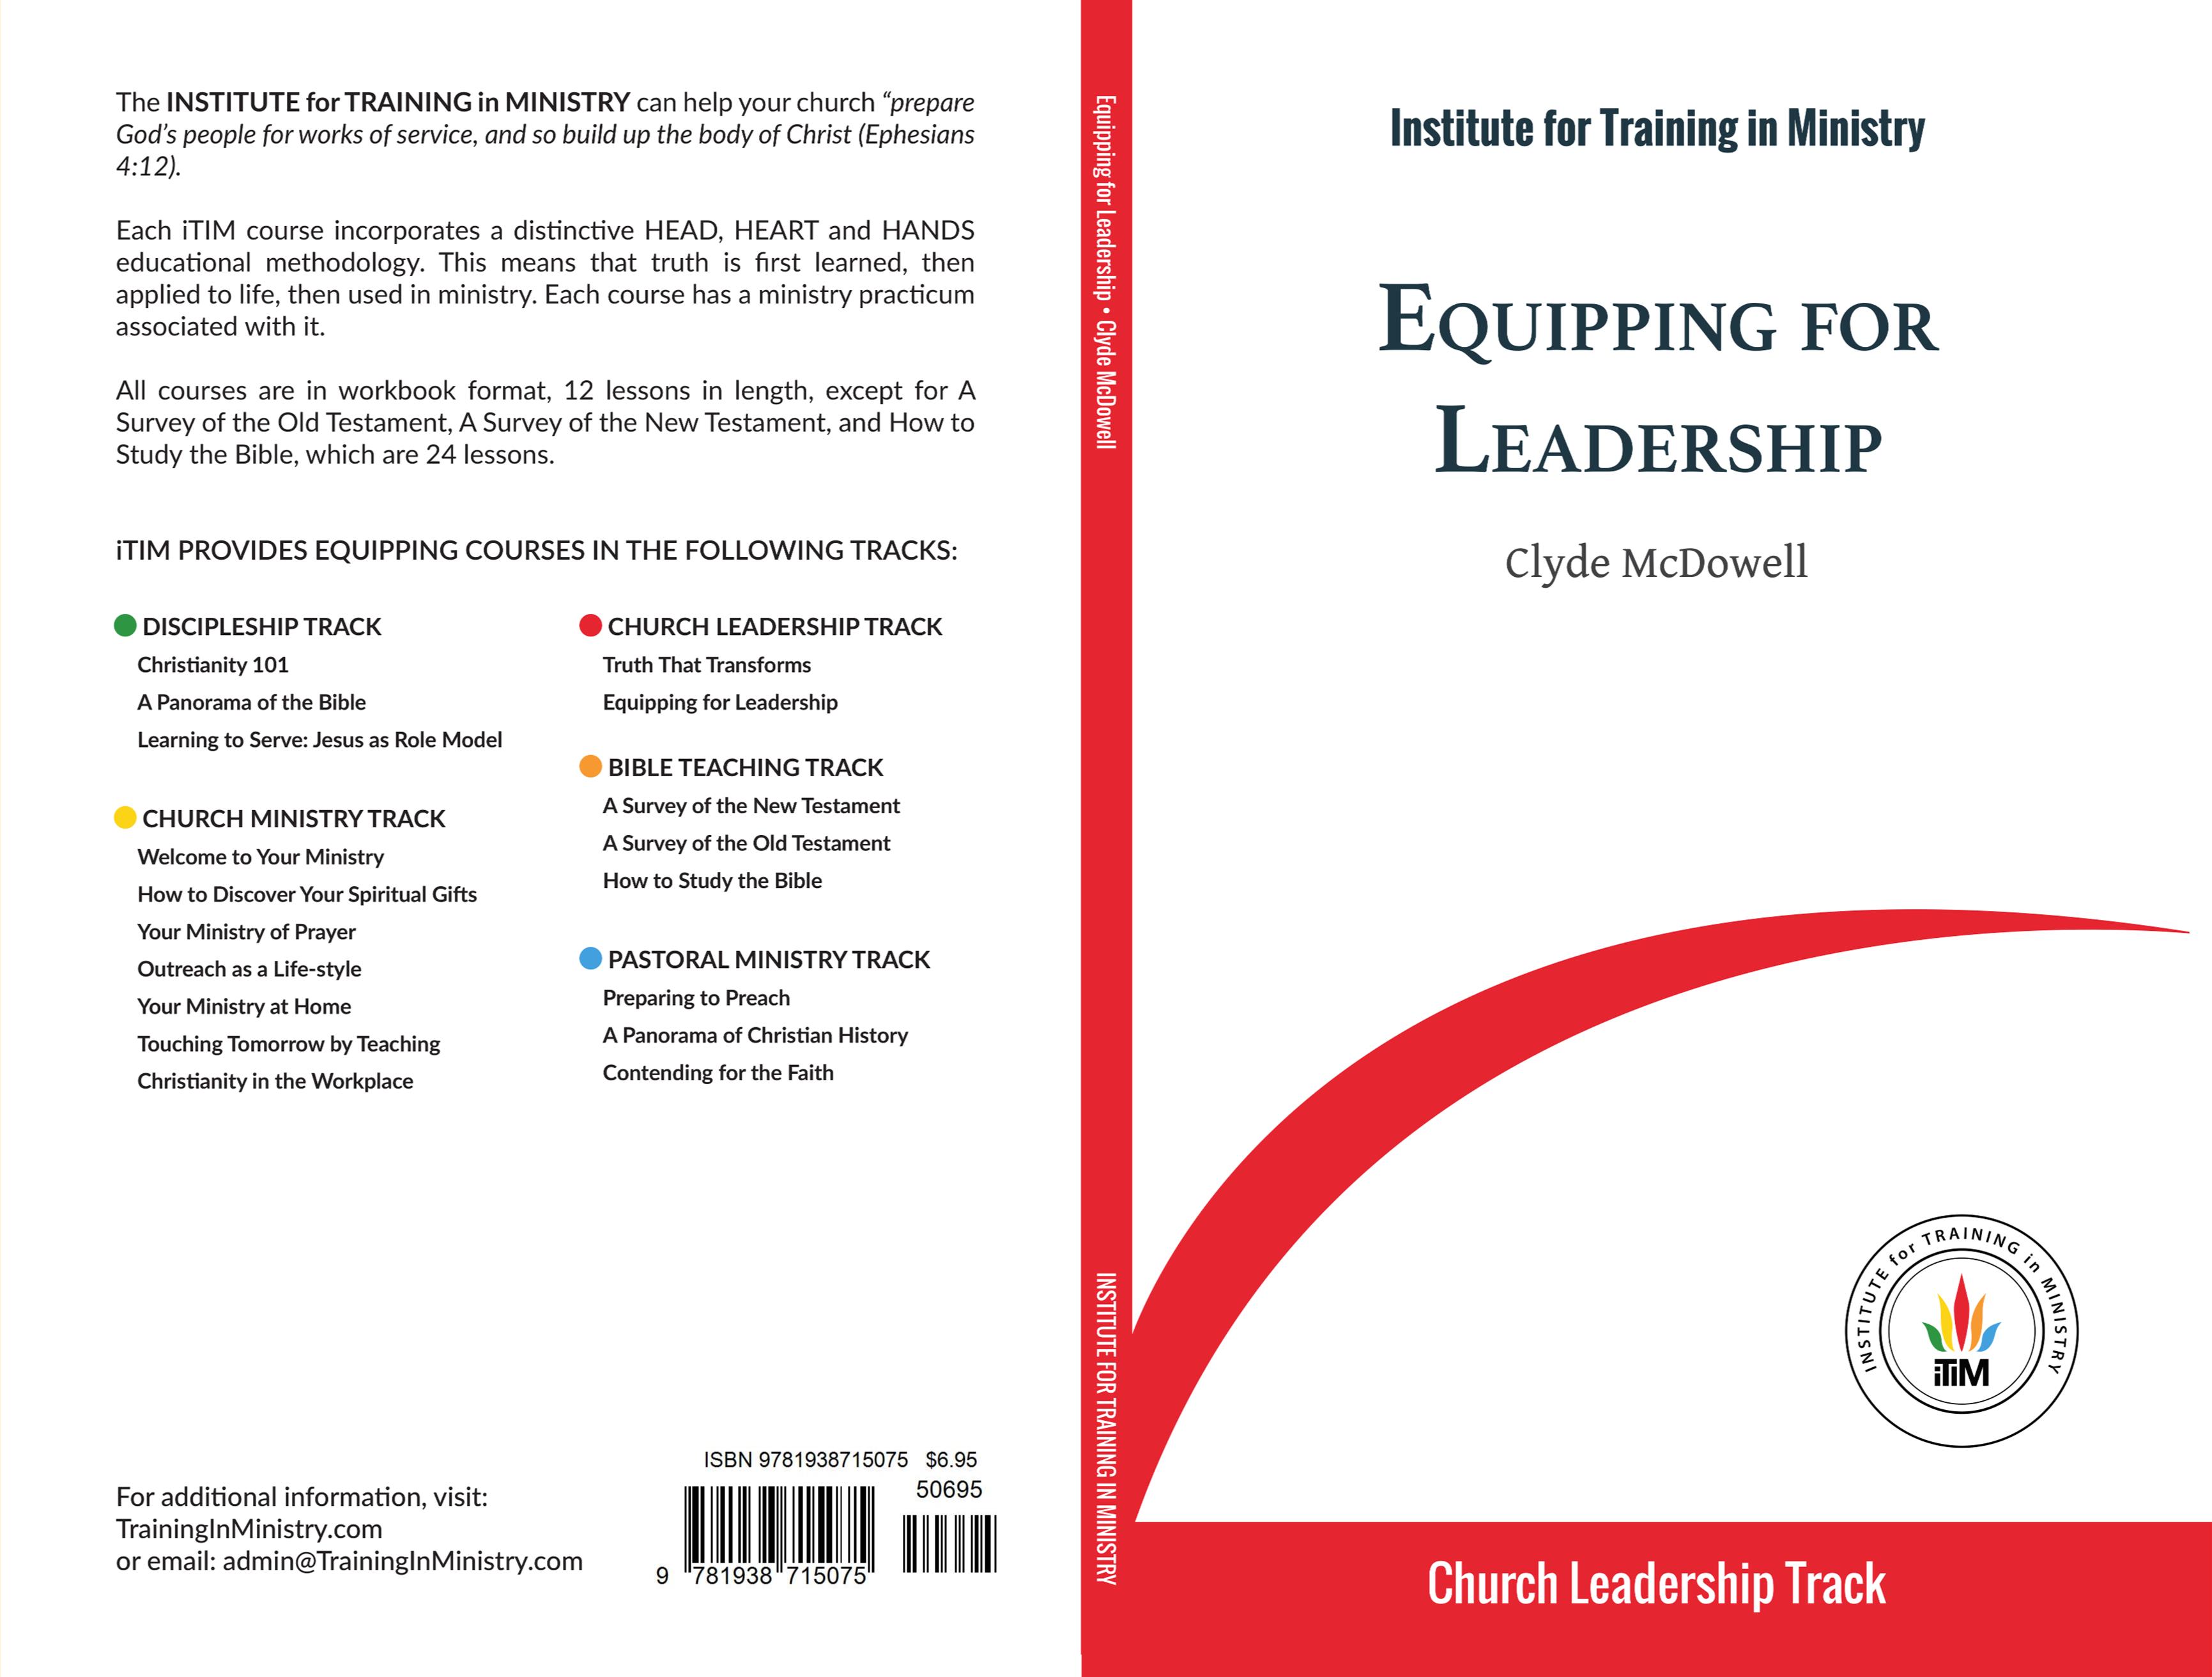 Equipping for Leadership cover image